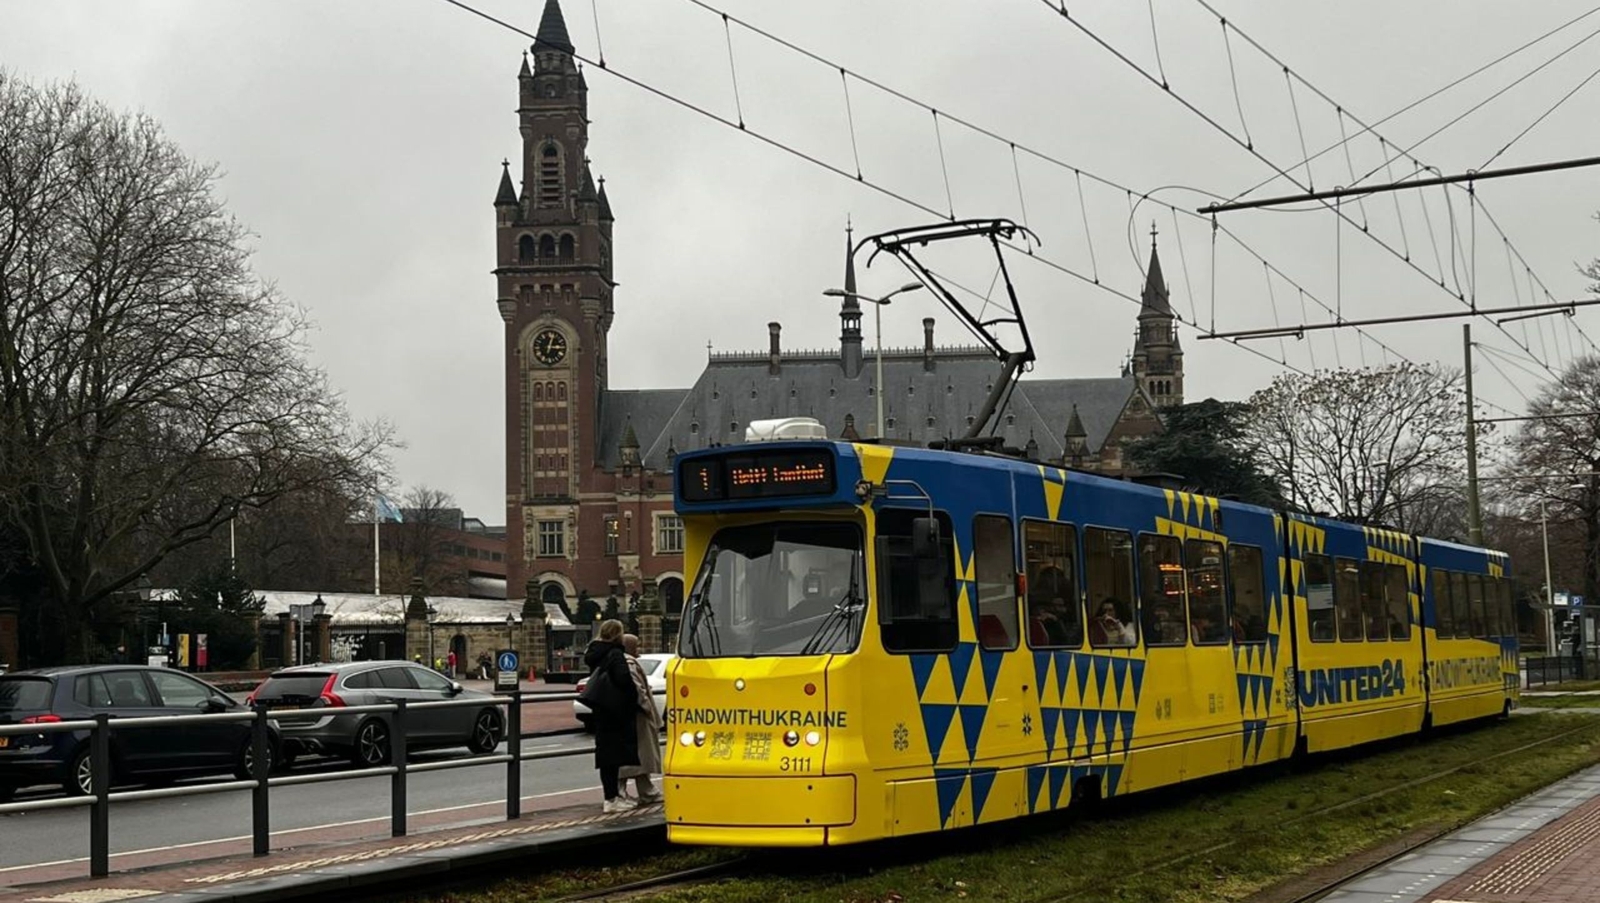 Another Streetcar With the UNITED24 Logo and QR Code is Active in Hague